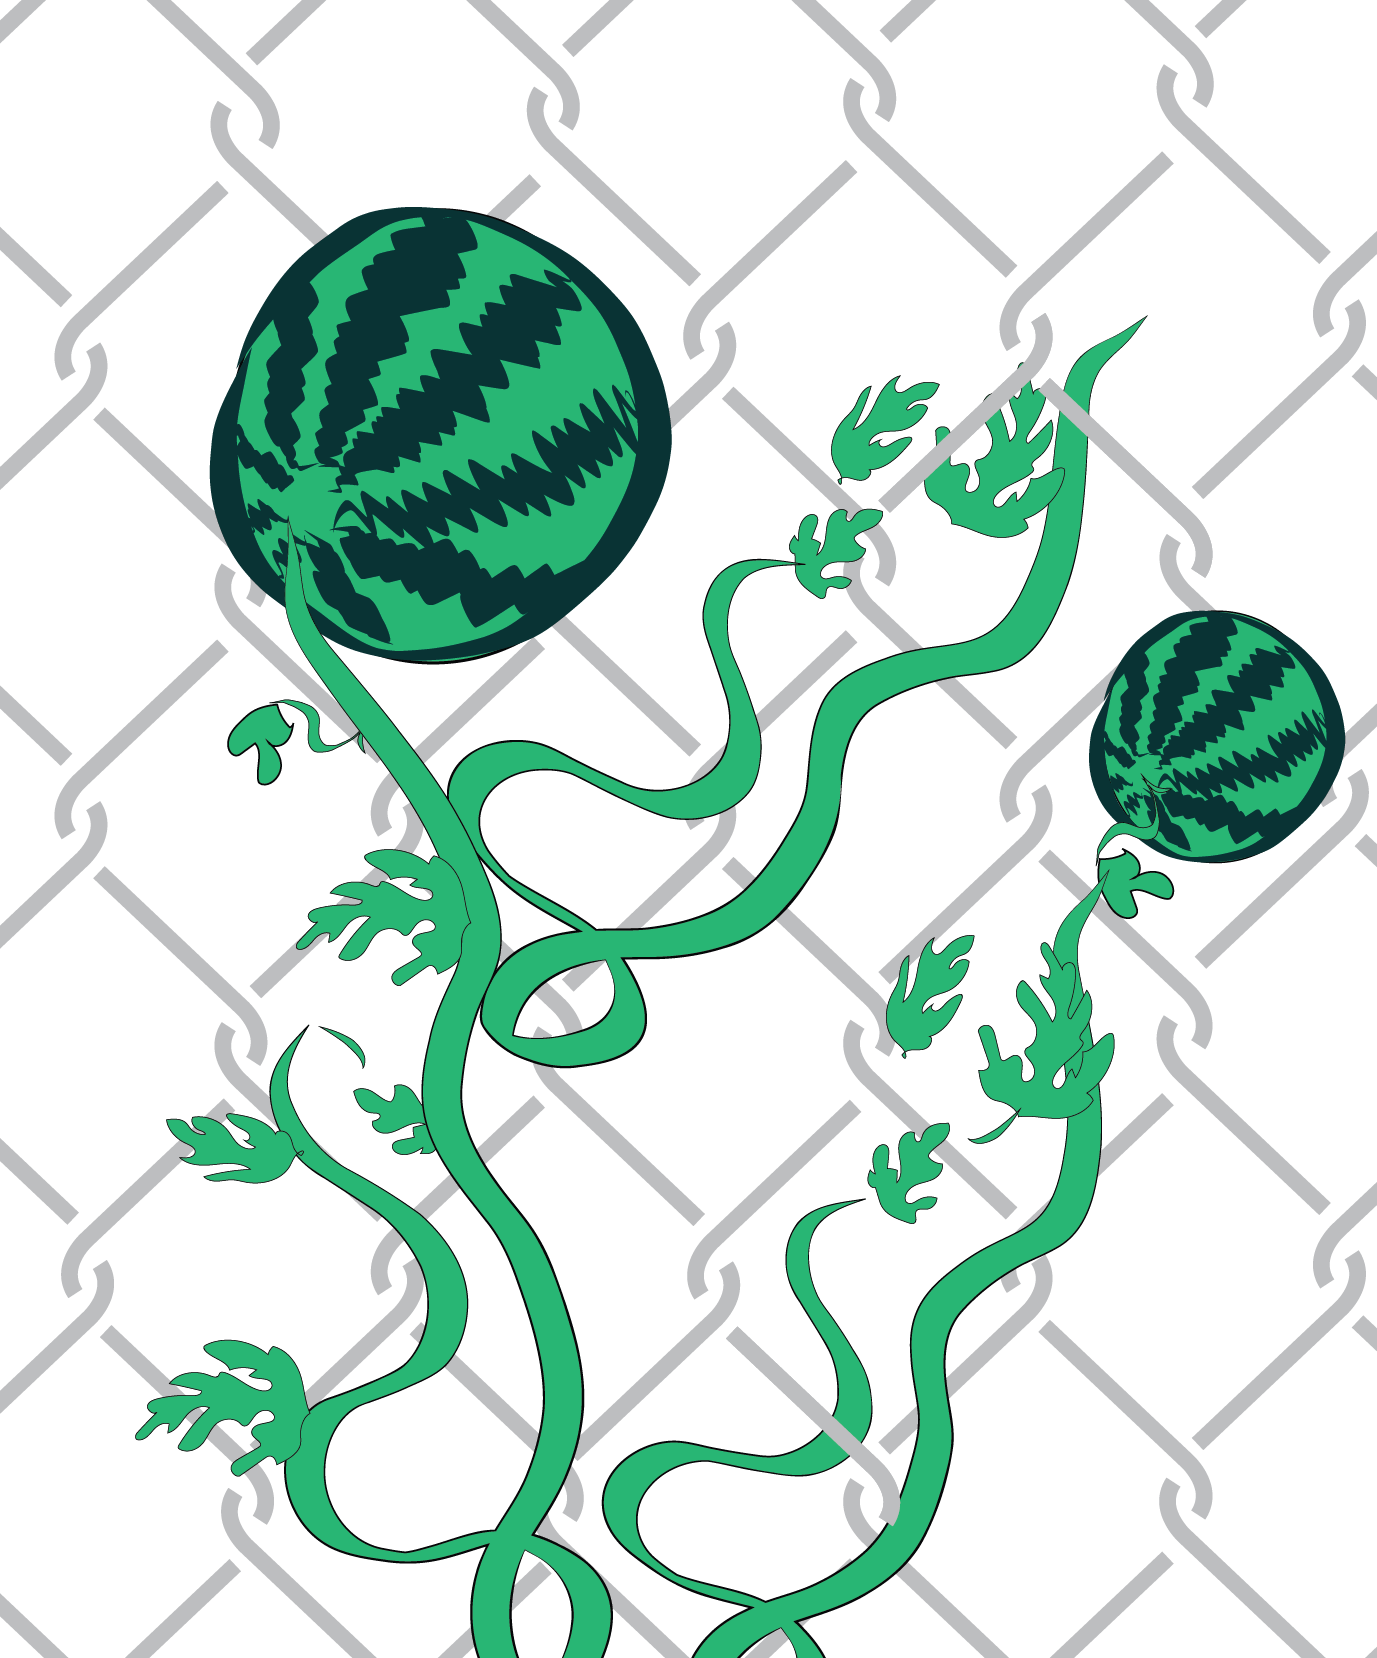 An image that shows a watermelon-like fruit vine climbing a chainlink fence.